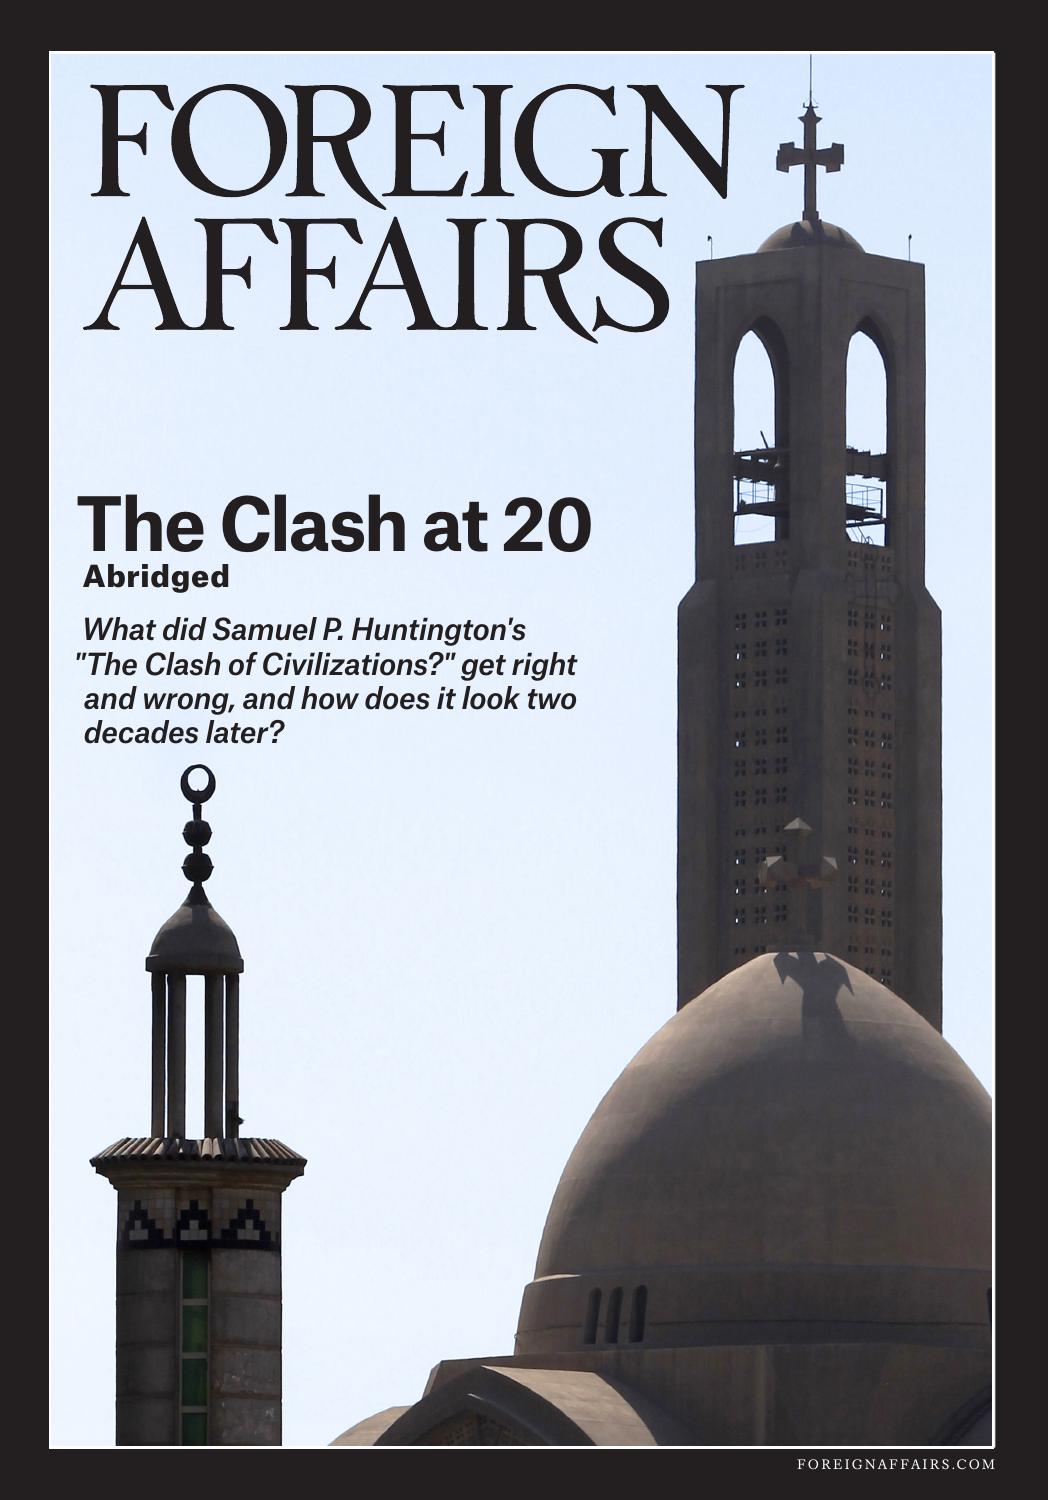 Foreign Affairs - The Clash at 20. Abridged